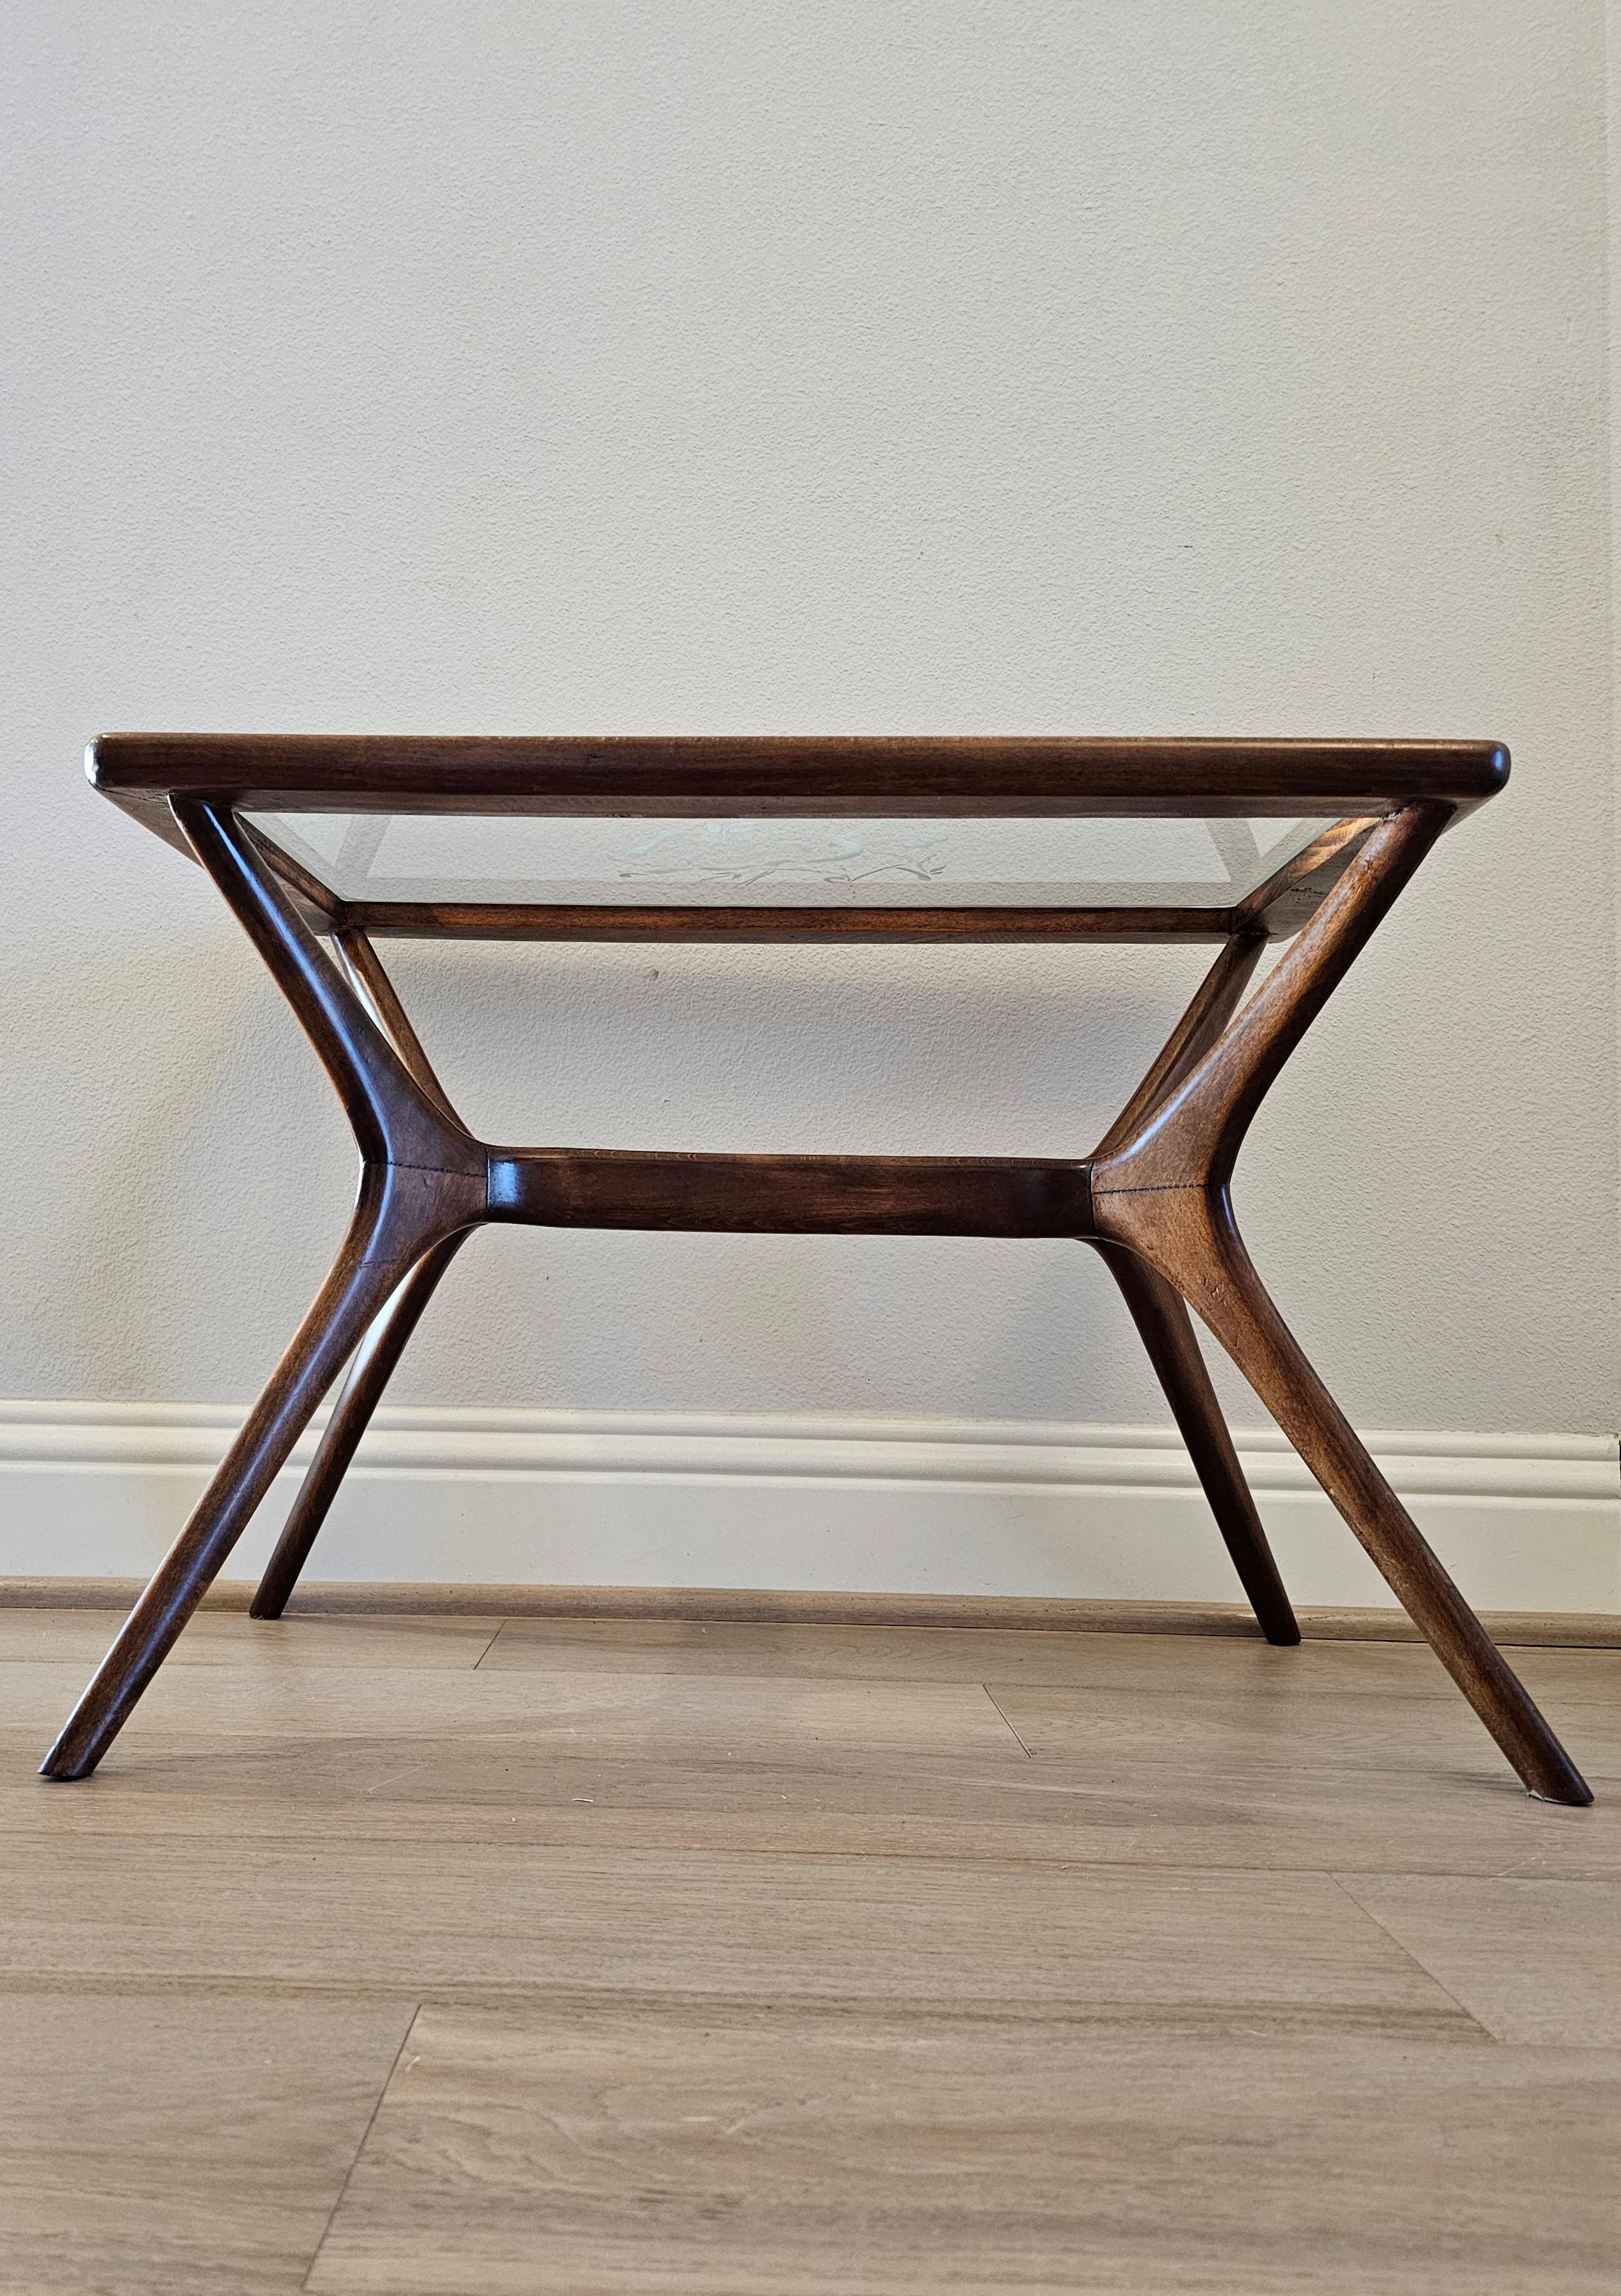 1950s Mid-Century Italian Modern Ico Parisi Style Sculptural Side Table  In Good Condition For Sale In Forney, TX